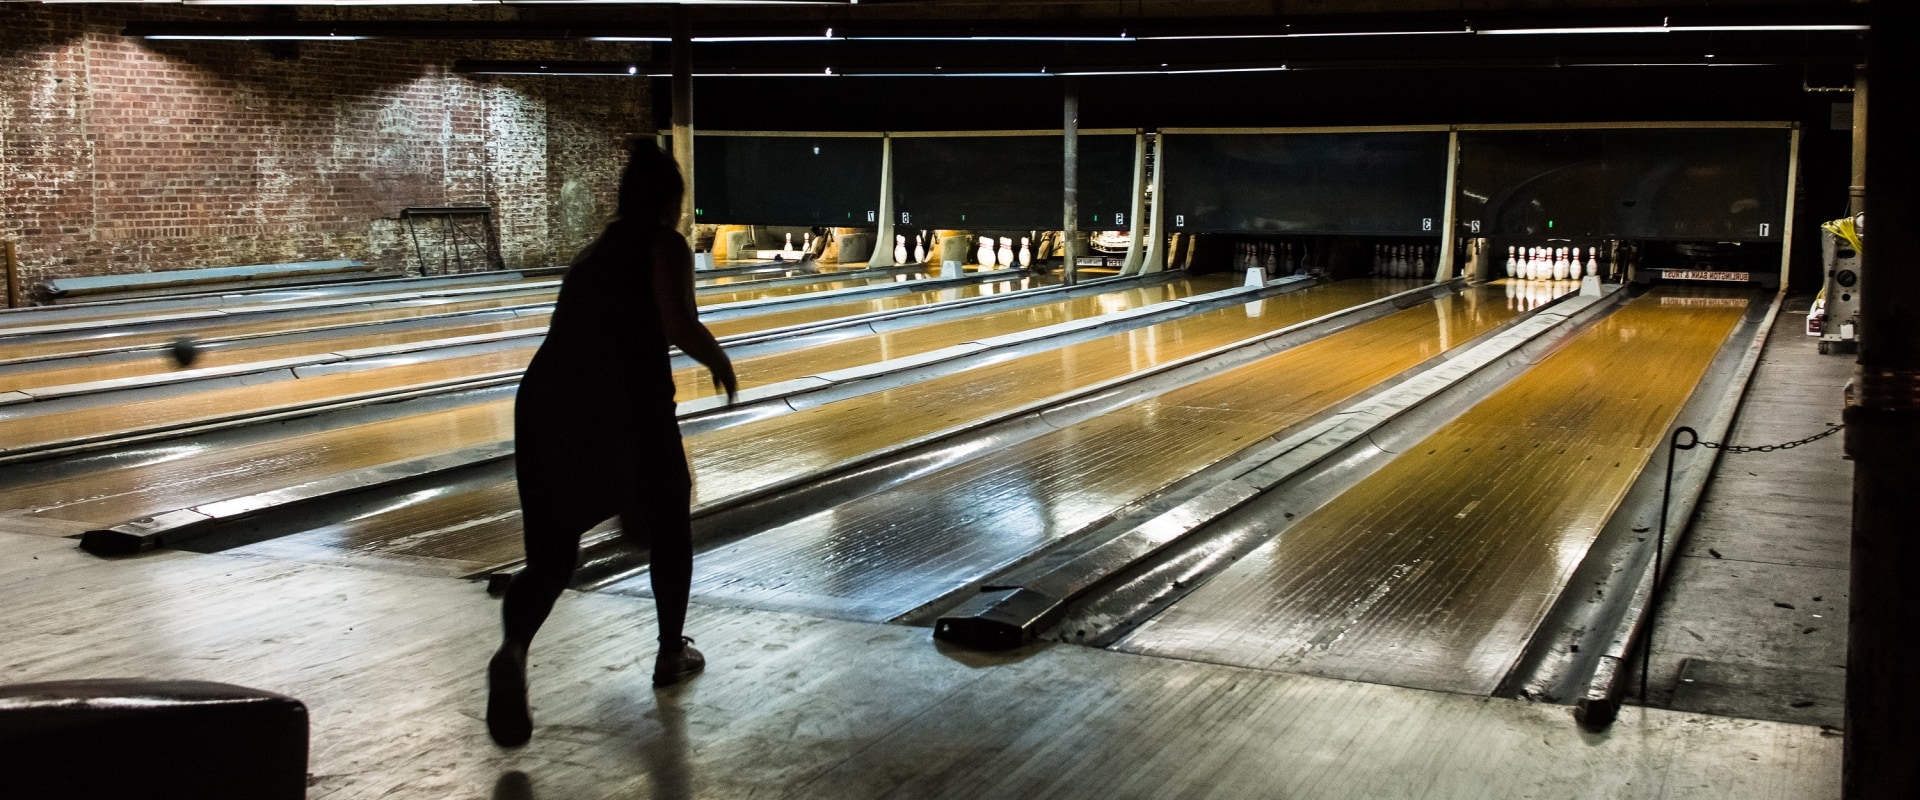 The Best Bowling Alleys in Suffolk County, NY